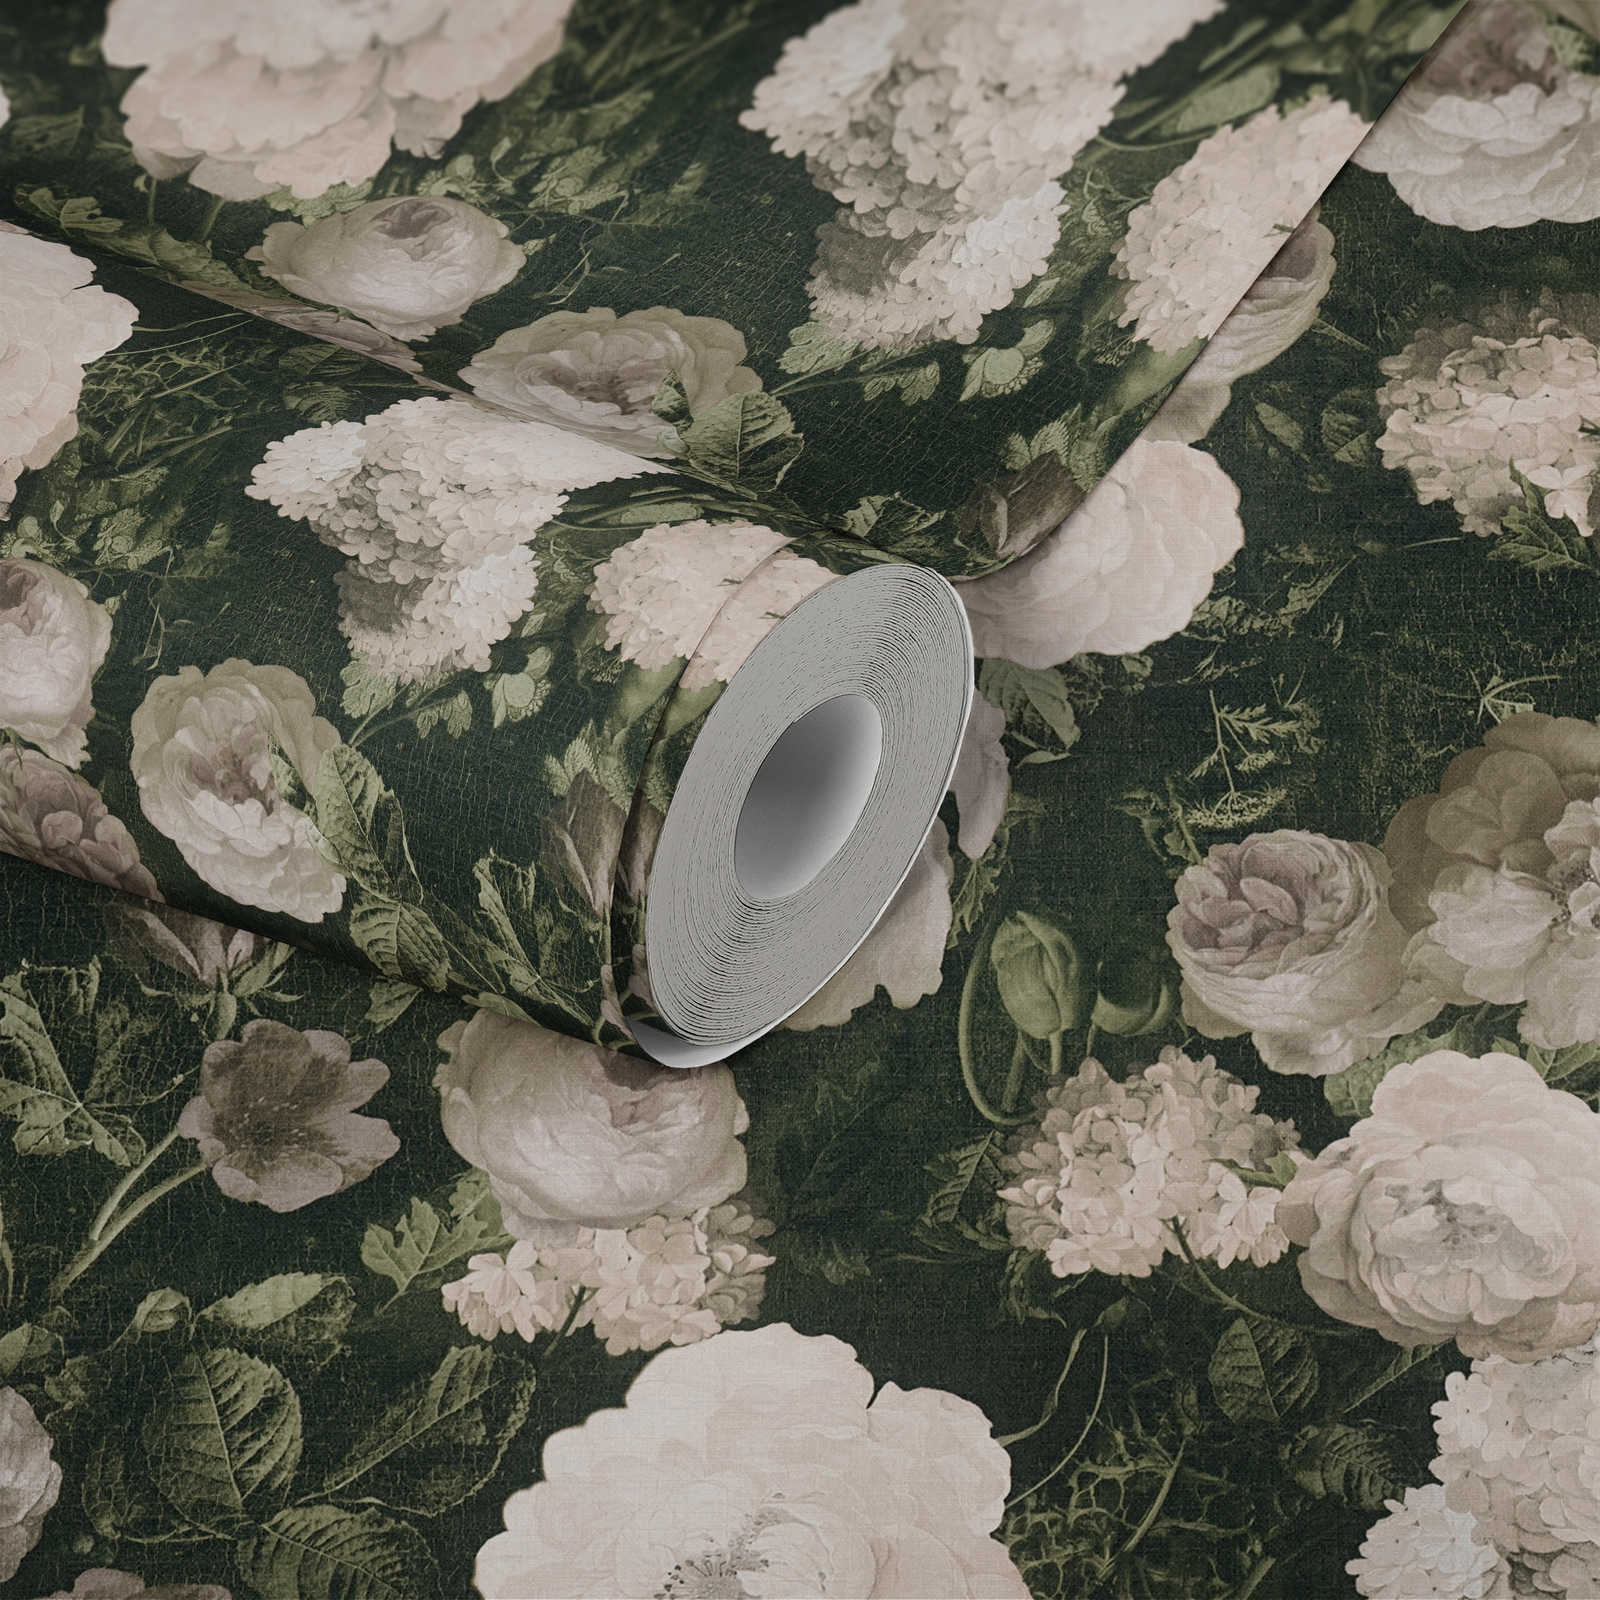             Non-woven wallpaper with roses, flowers carpet - cream, green, grey
        